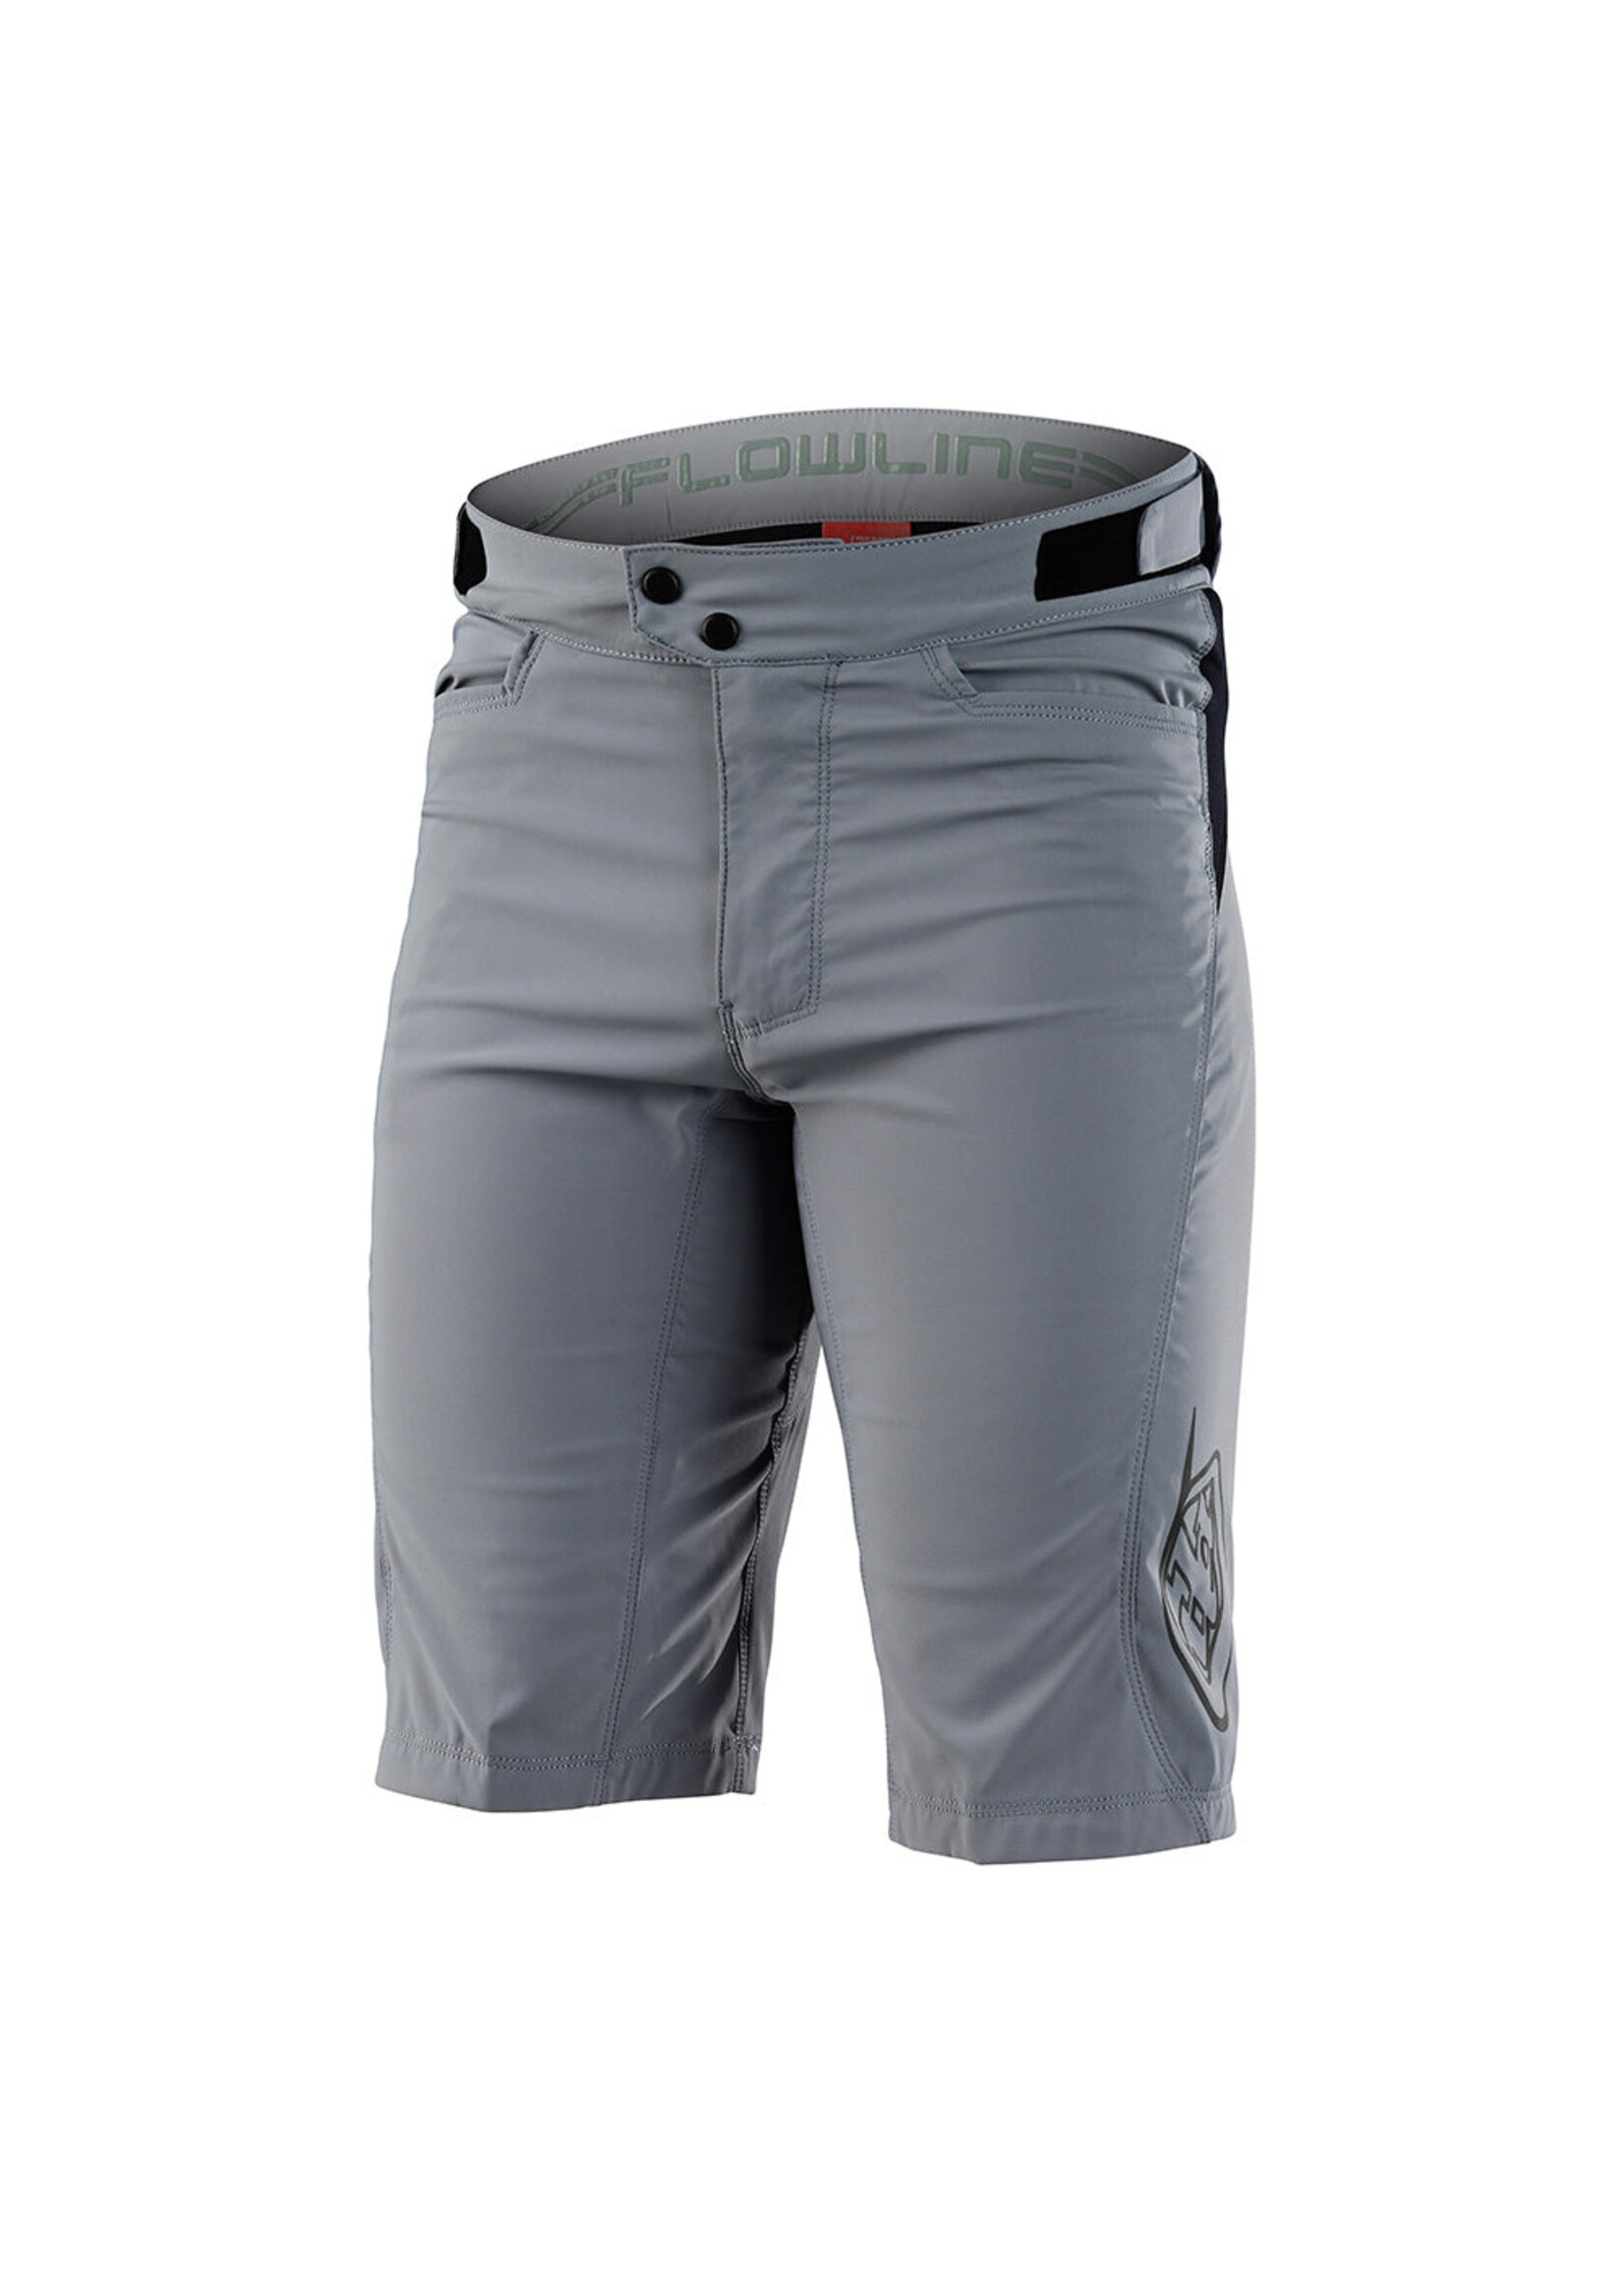 Troy Lee Designs Flowline Short with Liner - Gray